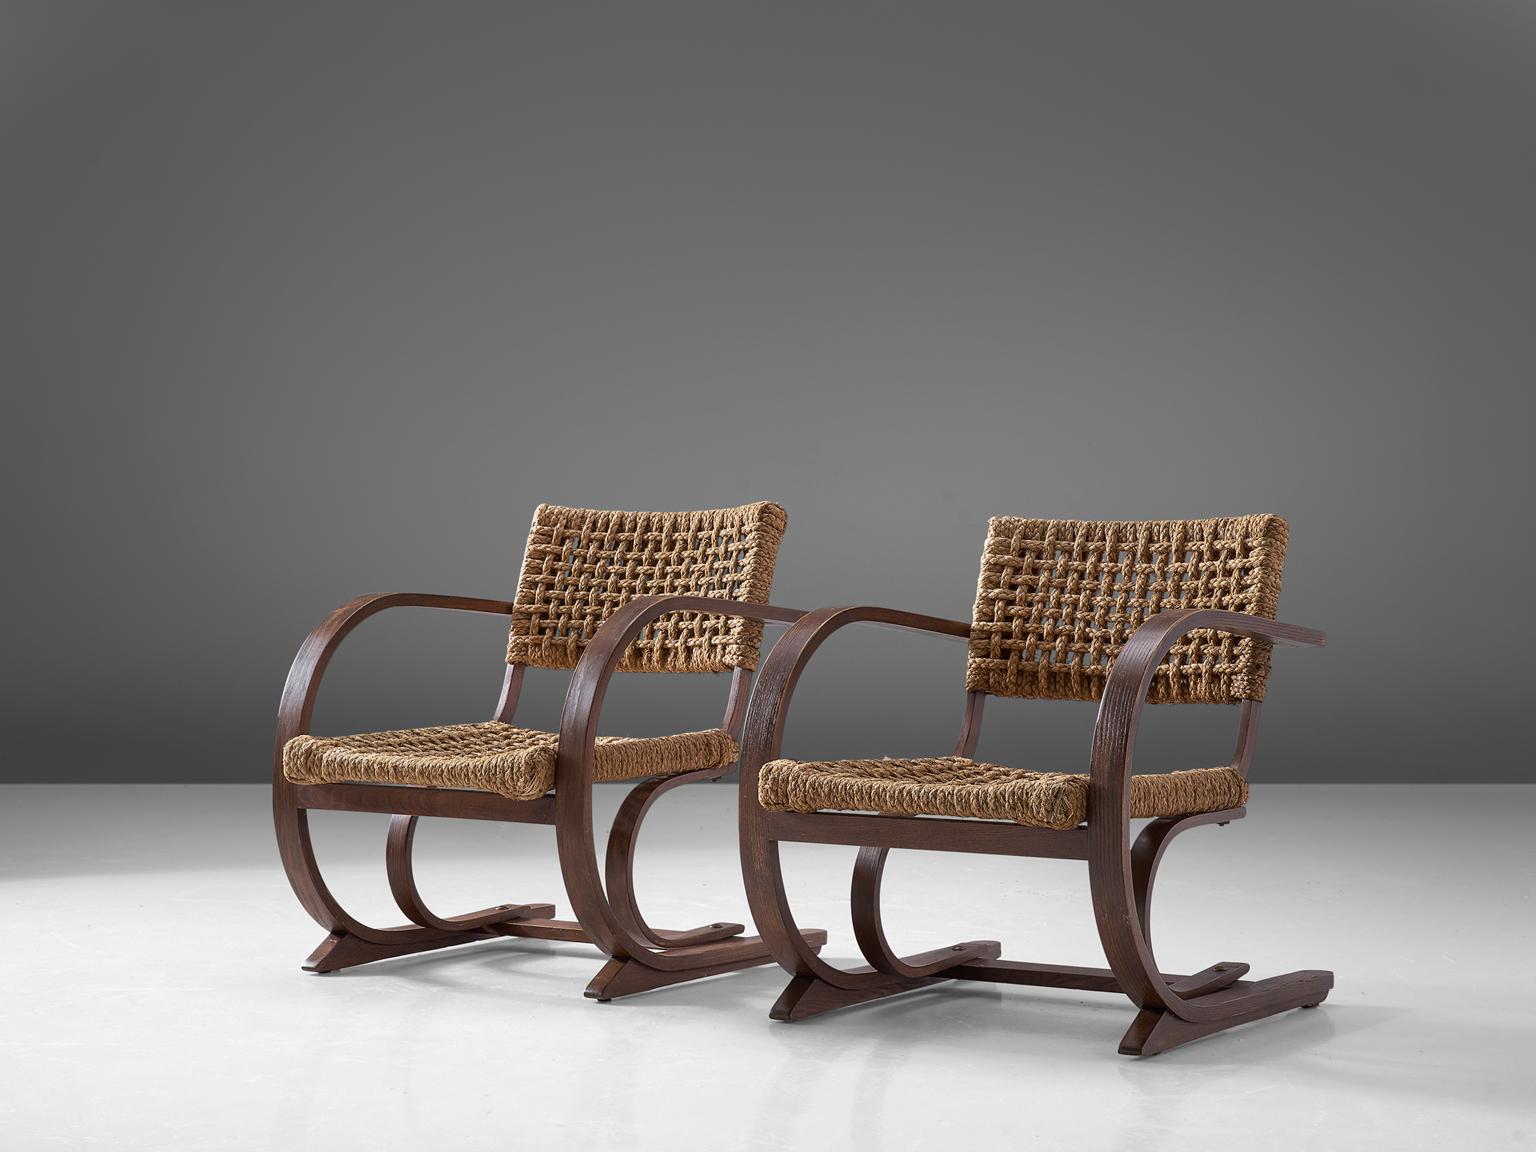 Bas Van Pelt, set of two armchairs, oak and rope, the Netherlands, late 1940s

This armchair was designed by Bas Van Pelt and produced in the Netherlands. The striking curved frame is made of oakwood. The double bentwood curved legs strengthen the